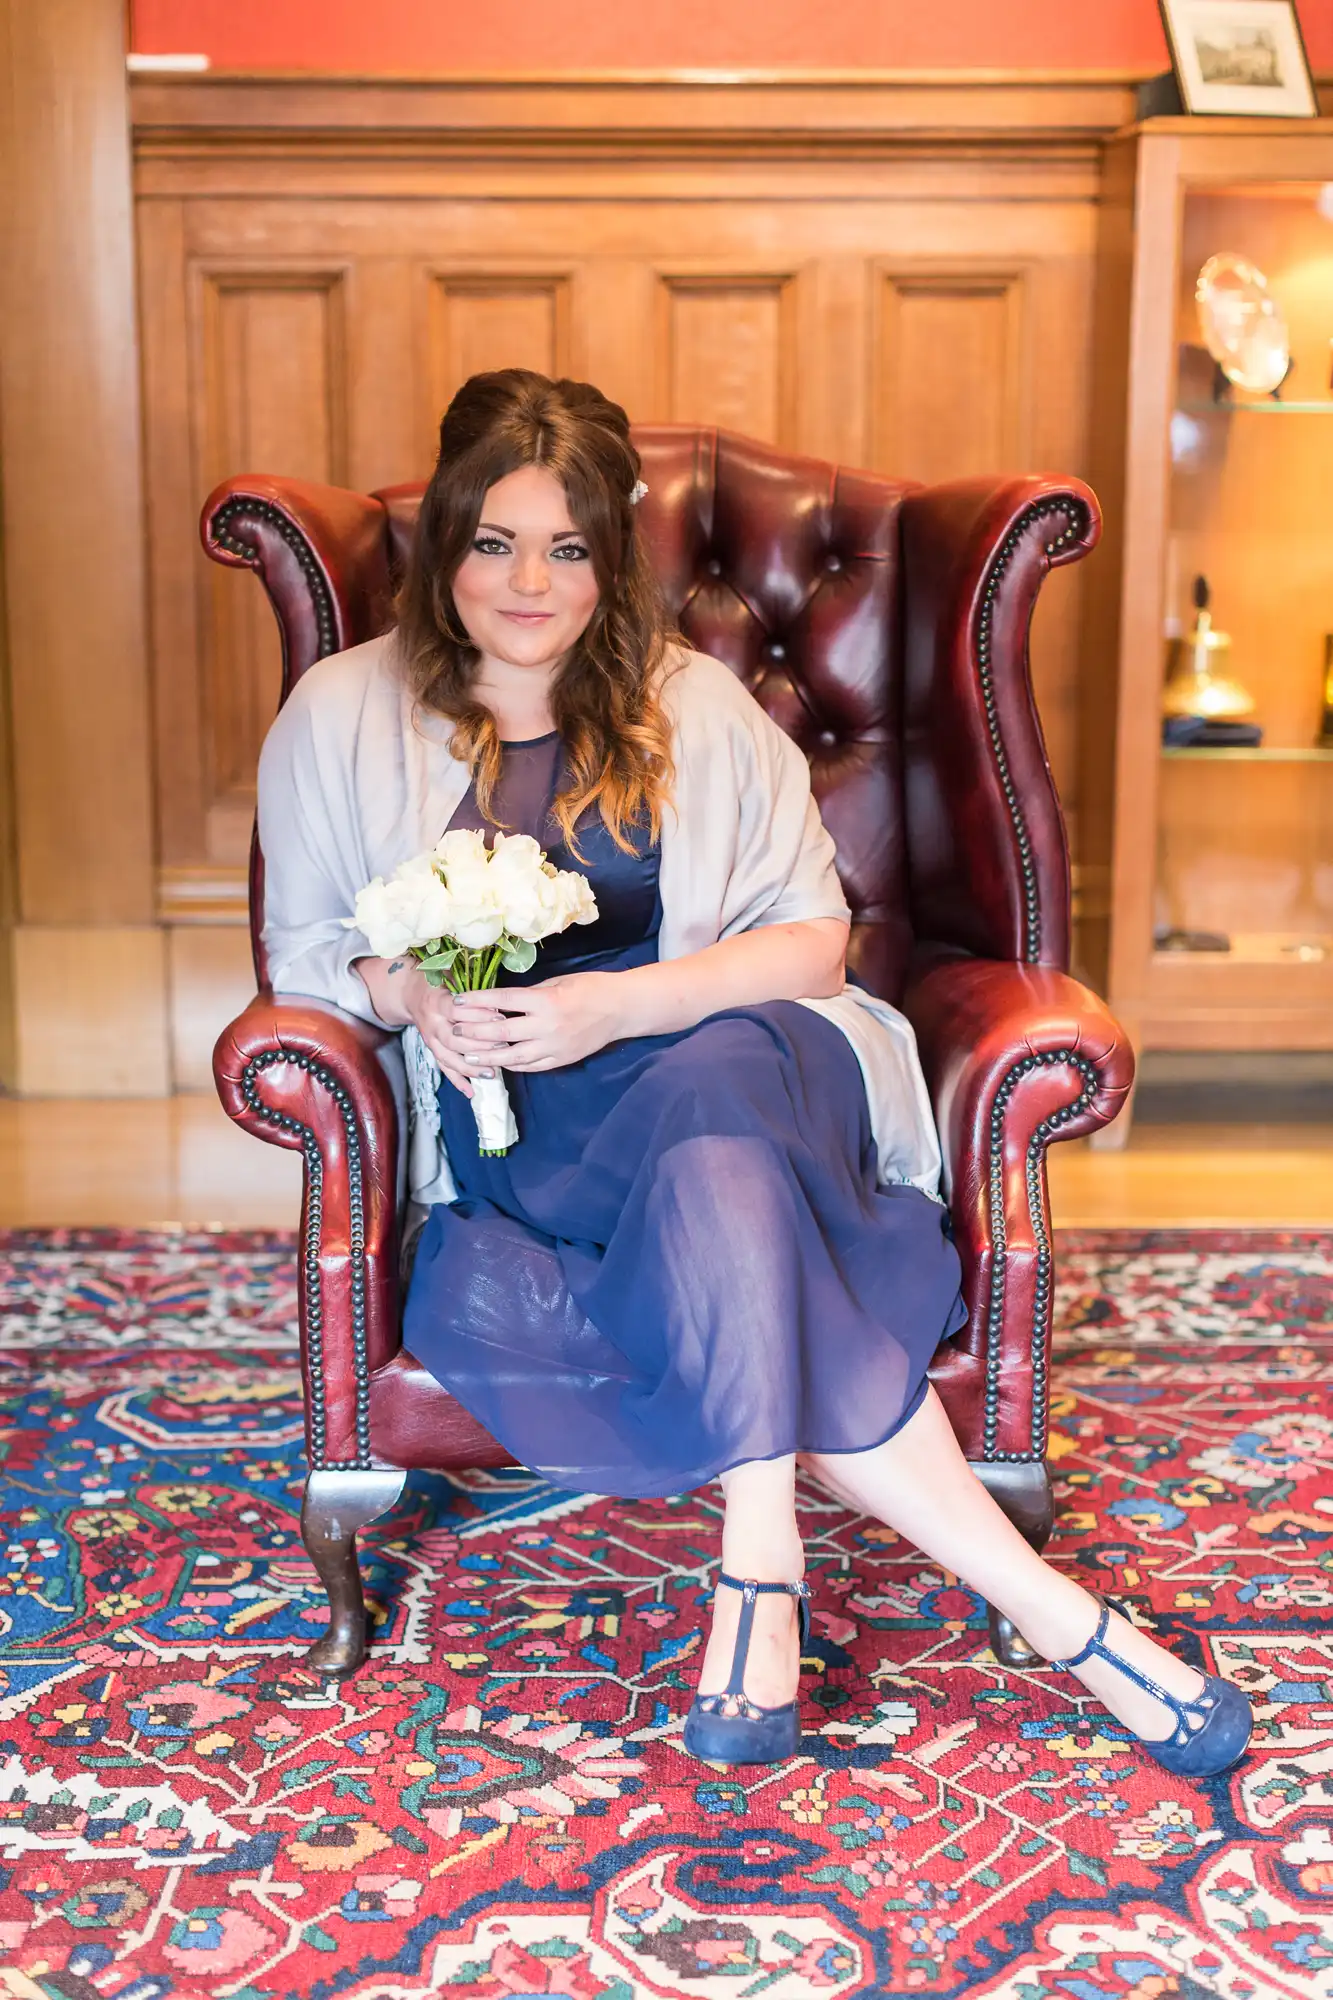 A woman in a navy blue dress and matching shoes sits in a red leather armchair, holding a bouquet of white flowers, with a patterned red and blue rug underneath.